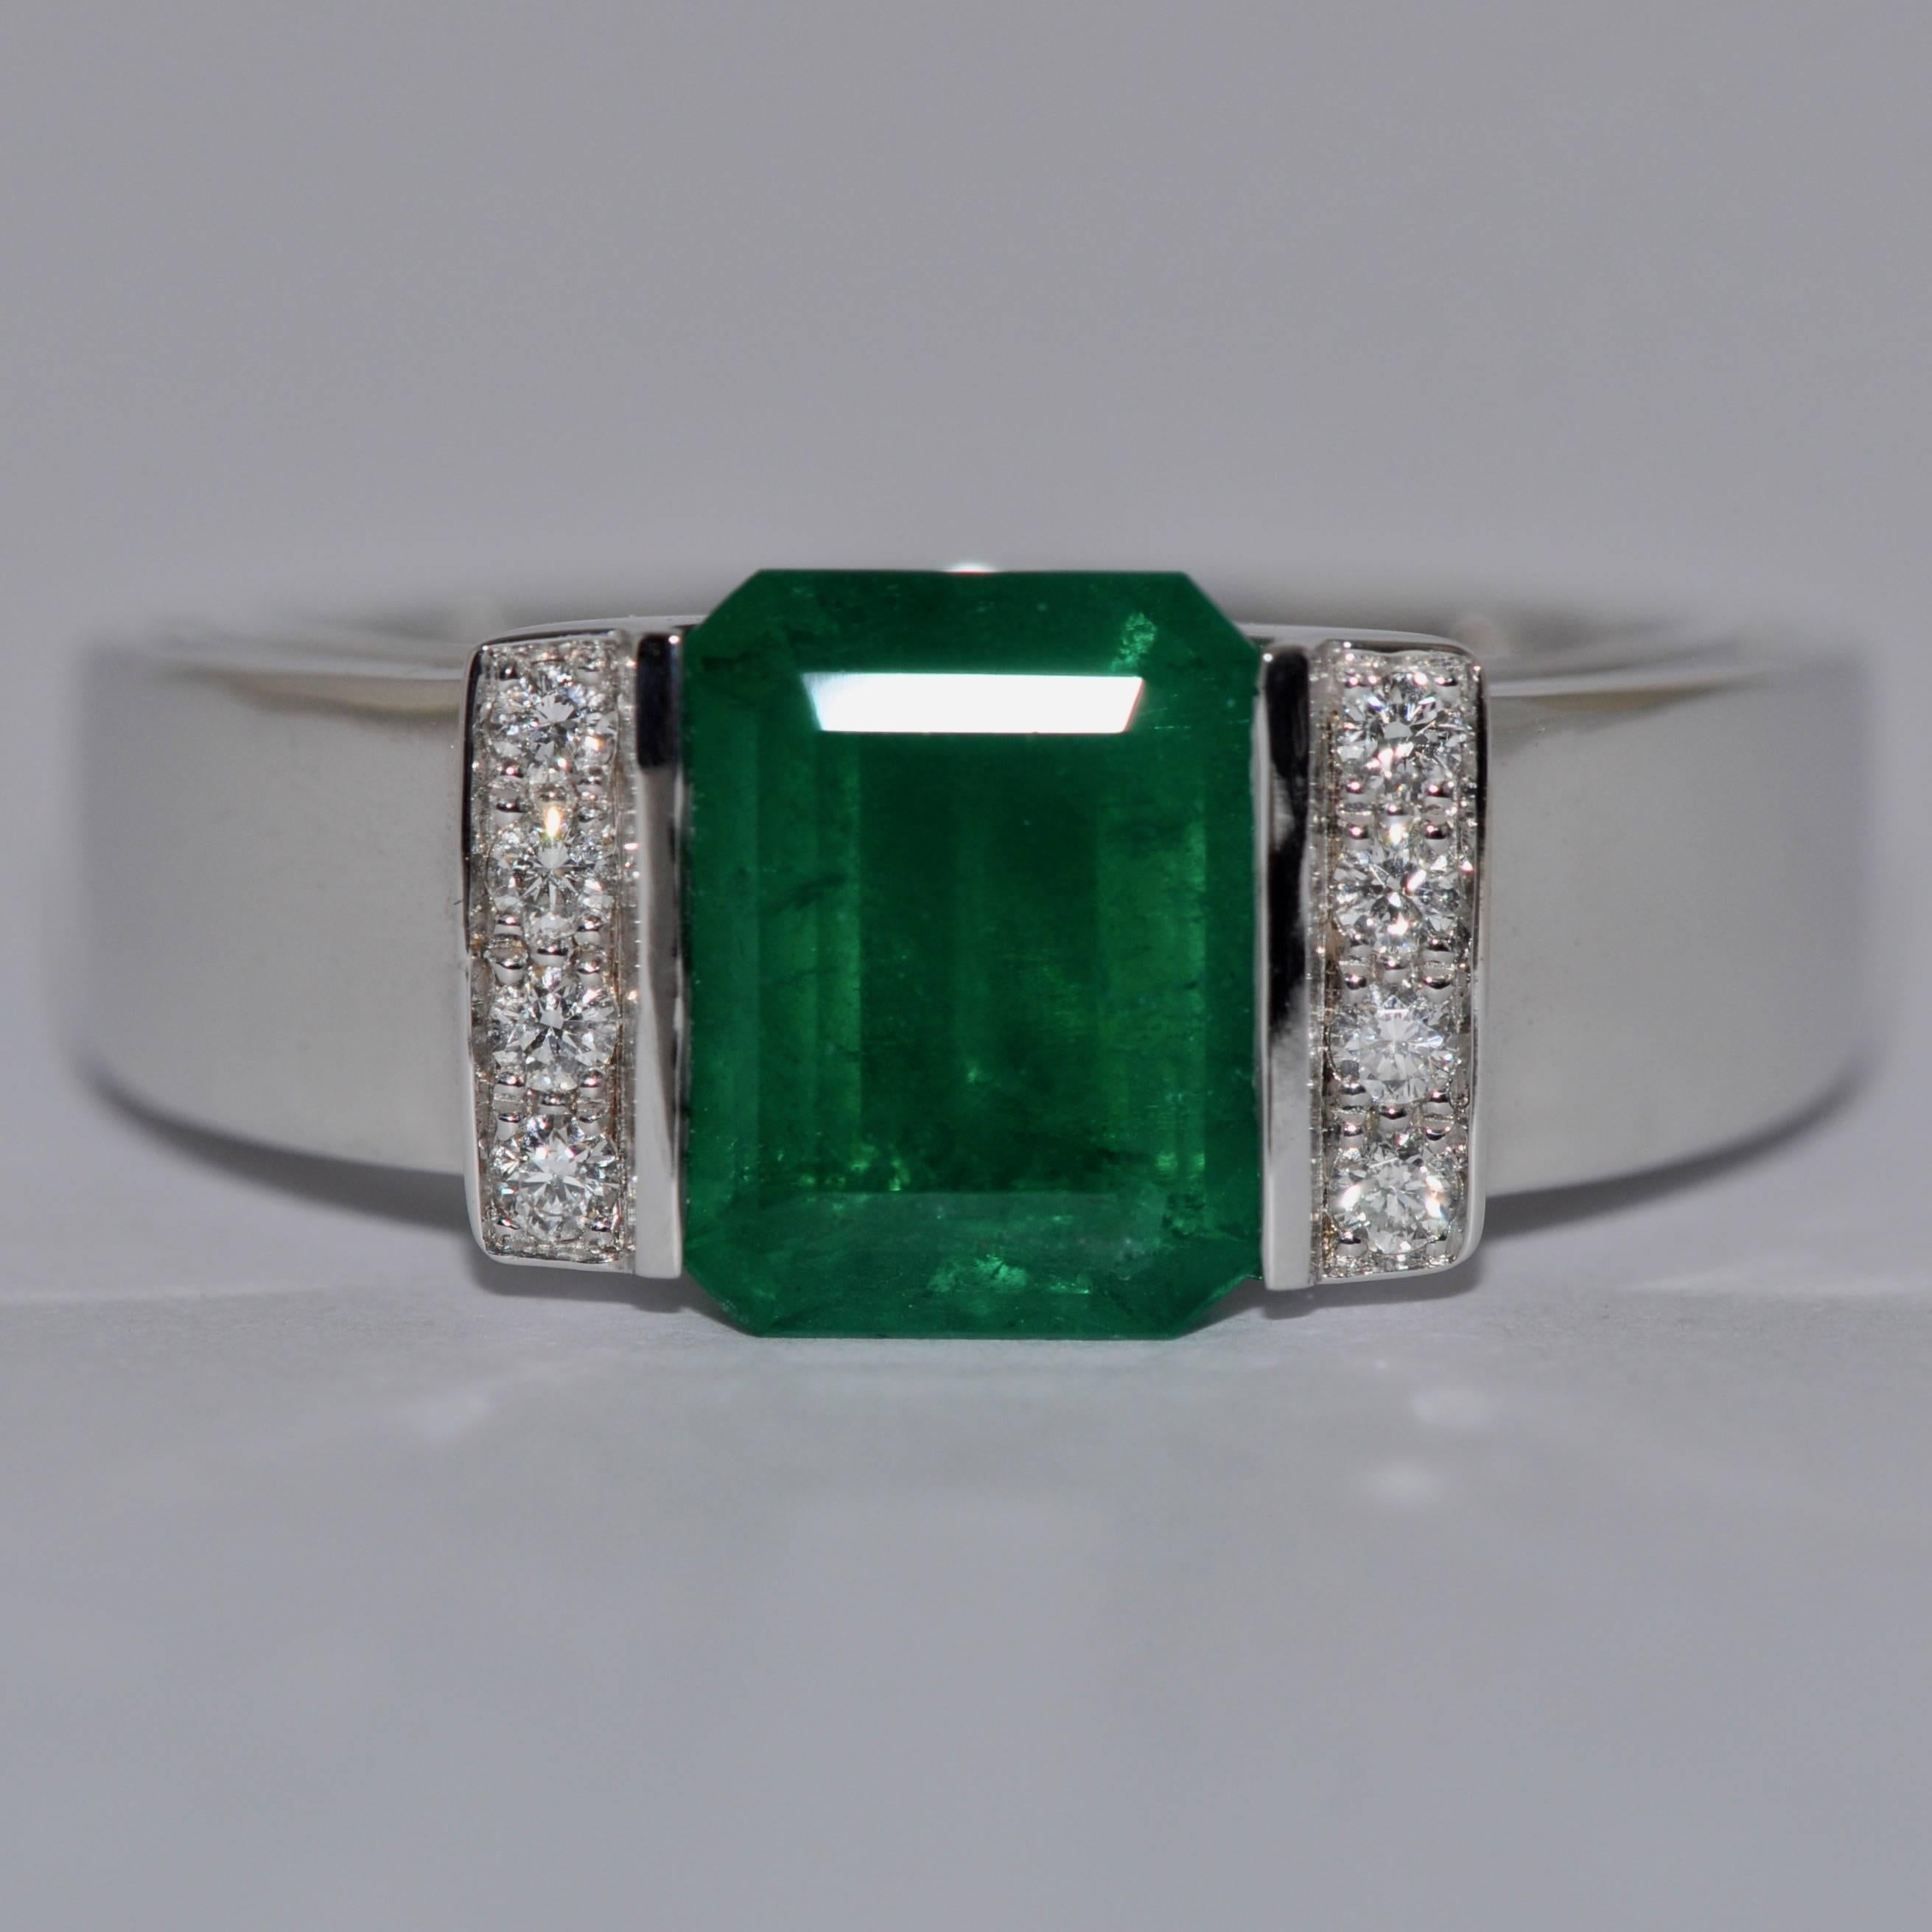 Emerald Cut Emerald and Diamonds White Gold Engagement Ring